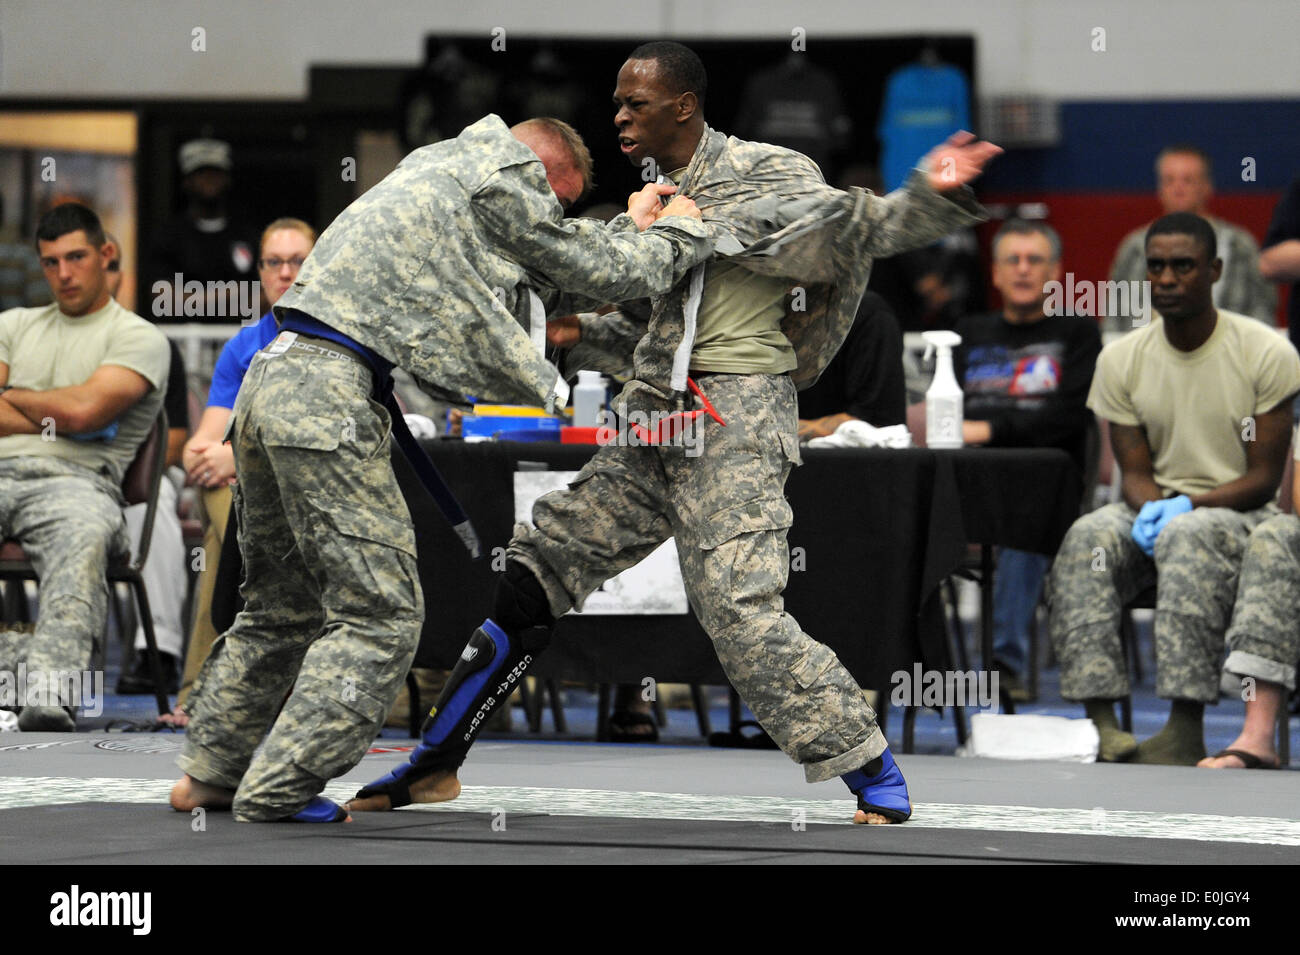 Spc. Larry Jackson (red), Fort Hood, and Spc. Miles McDonald (blue), Missouri National Guard, grapple on the mats in the semi-f Stock Photo